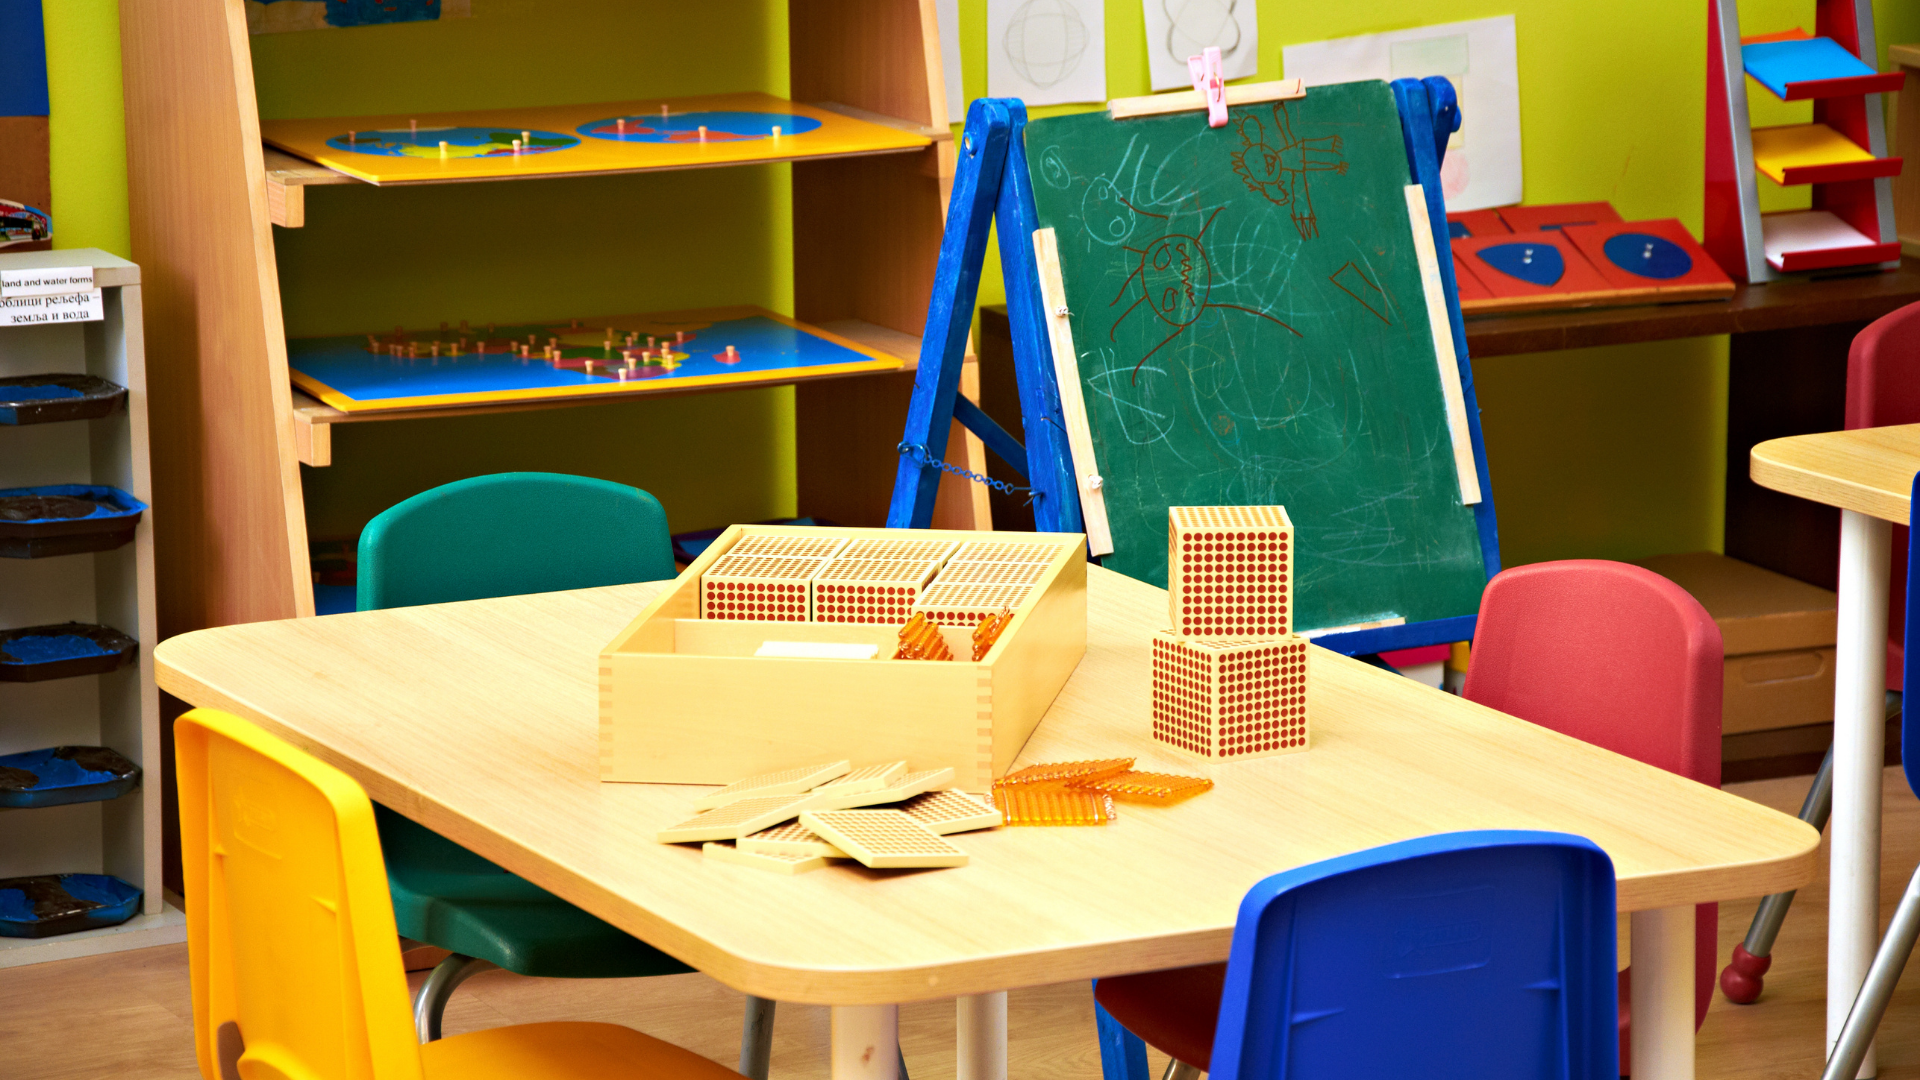 An image of a close up on a small table with four colorful small chairs surrounding it and on top of the table there are blocks. There’s also an easel with green chalkboard for children to play with.